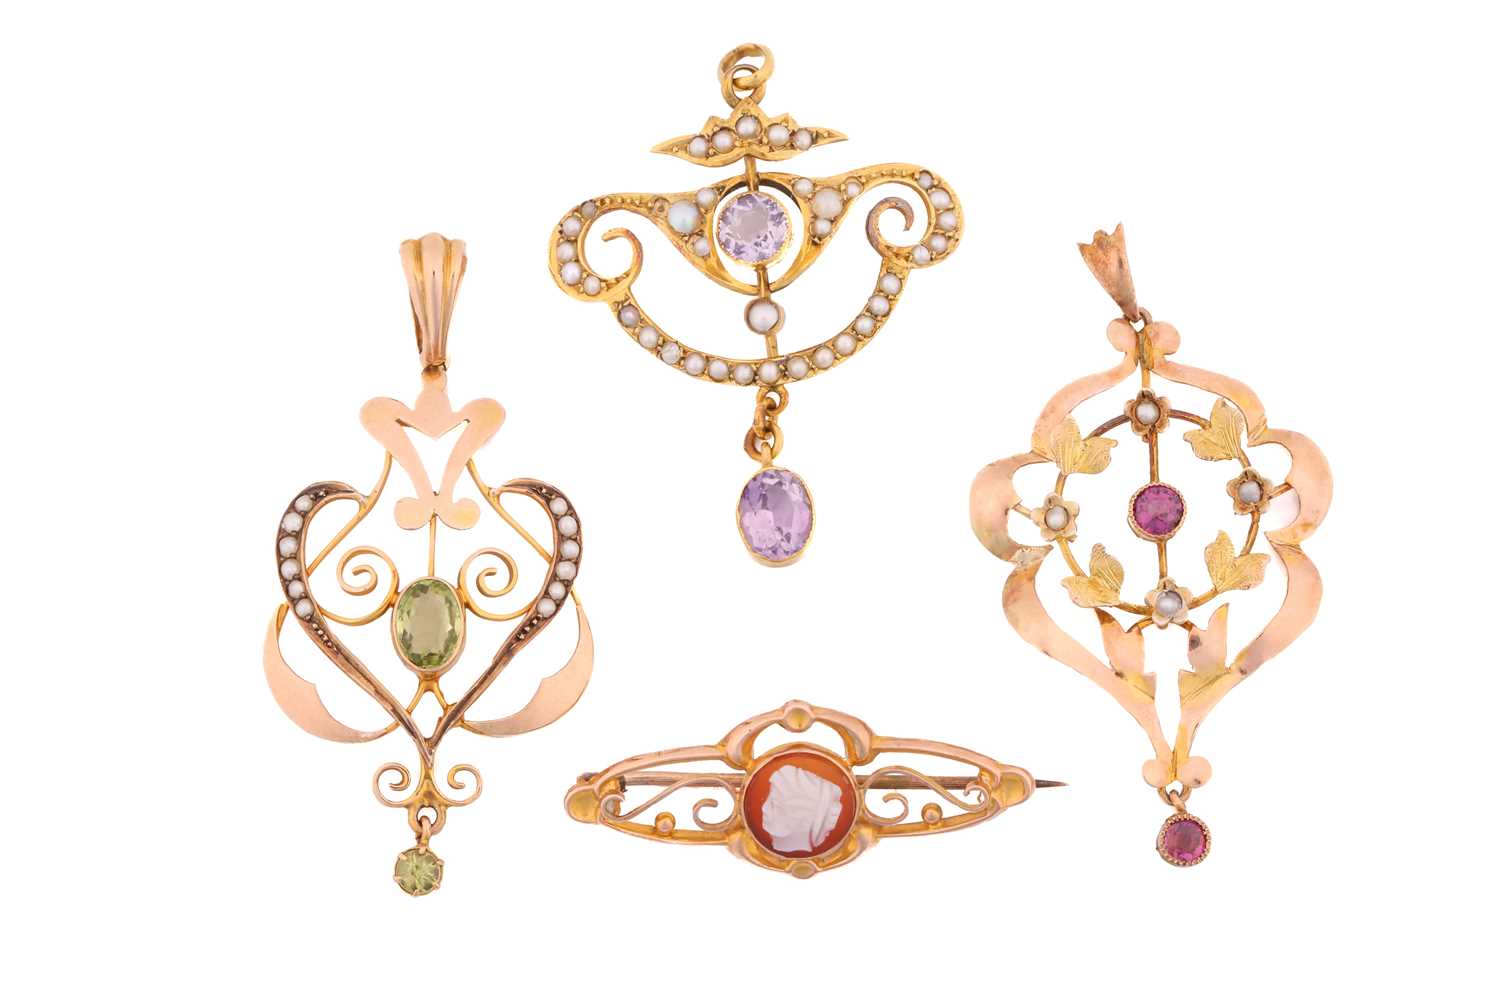 Three gem-set pendants and a cameo bar brooch; including an Edwardian scrolled pendant with floral